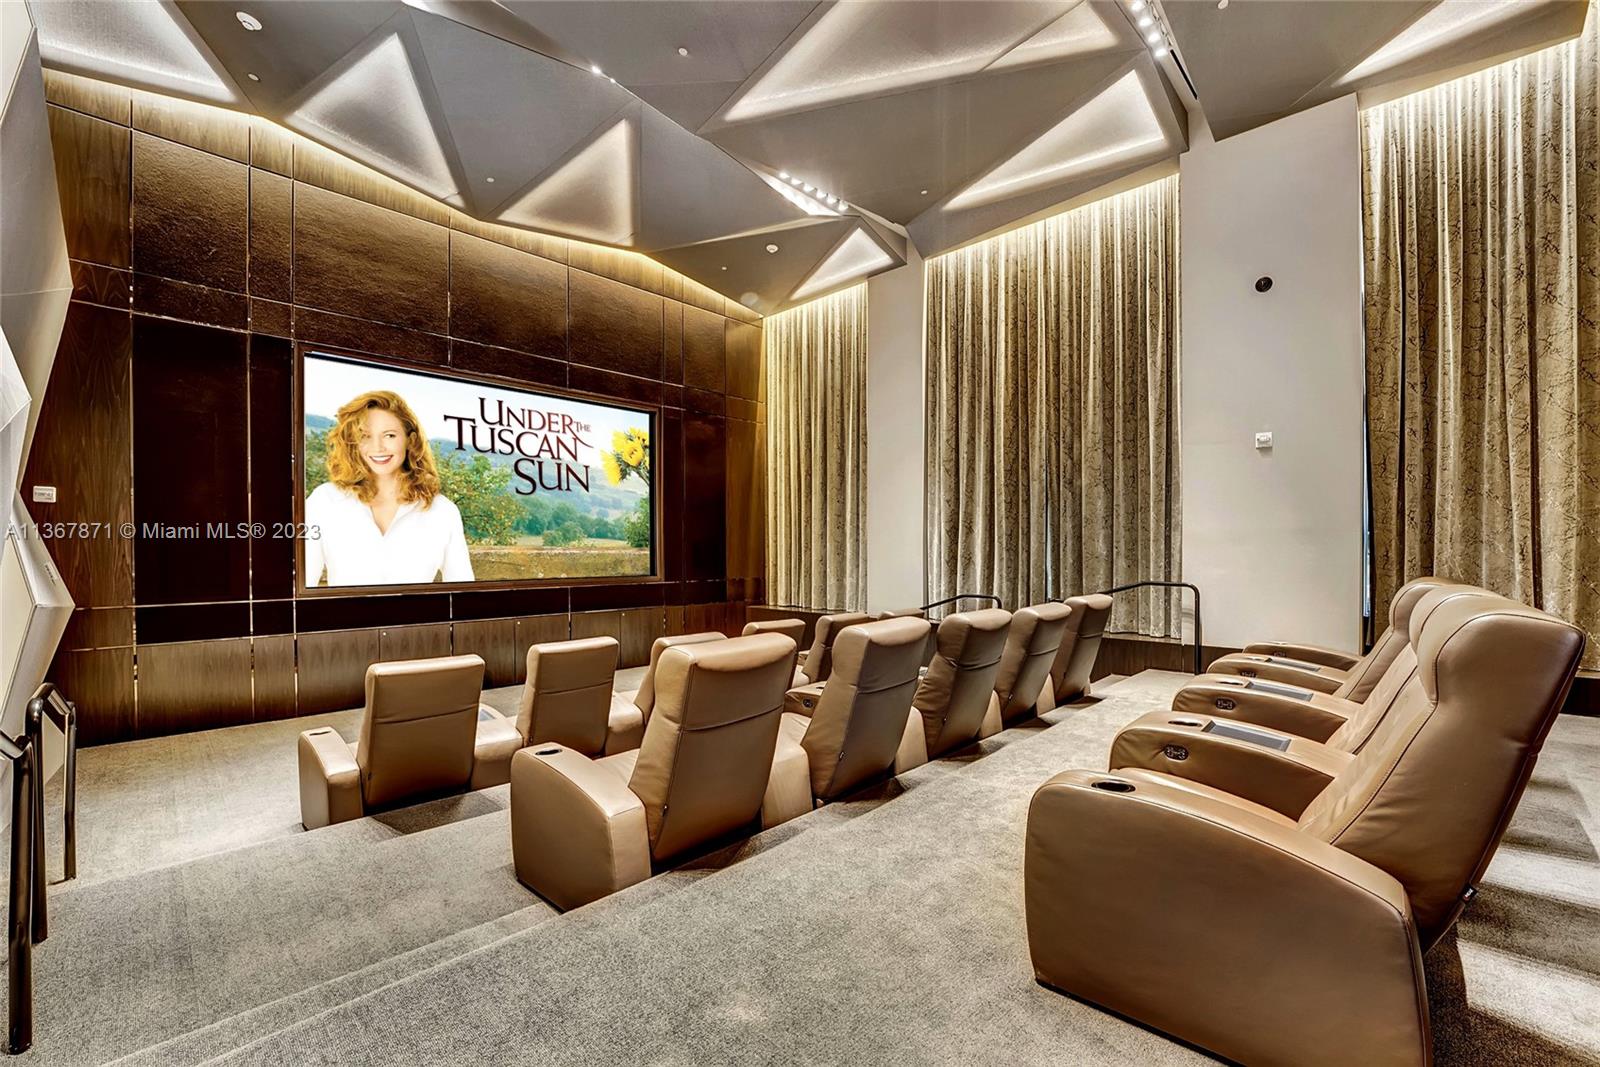 Reserve your private movie viewing.